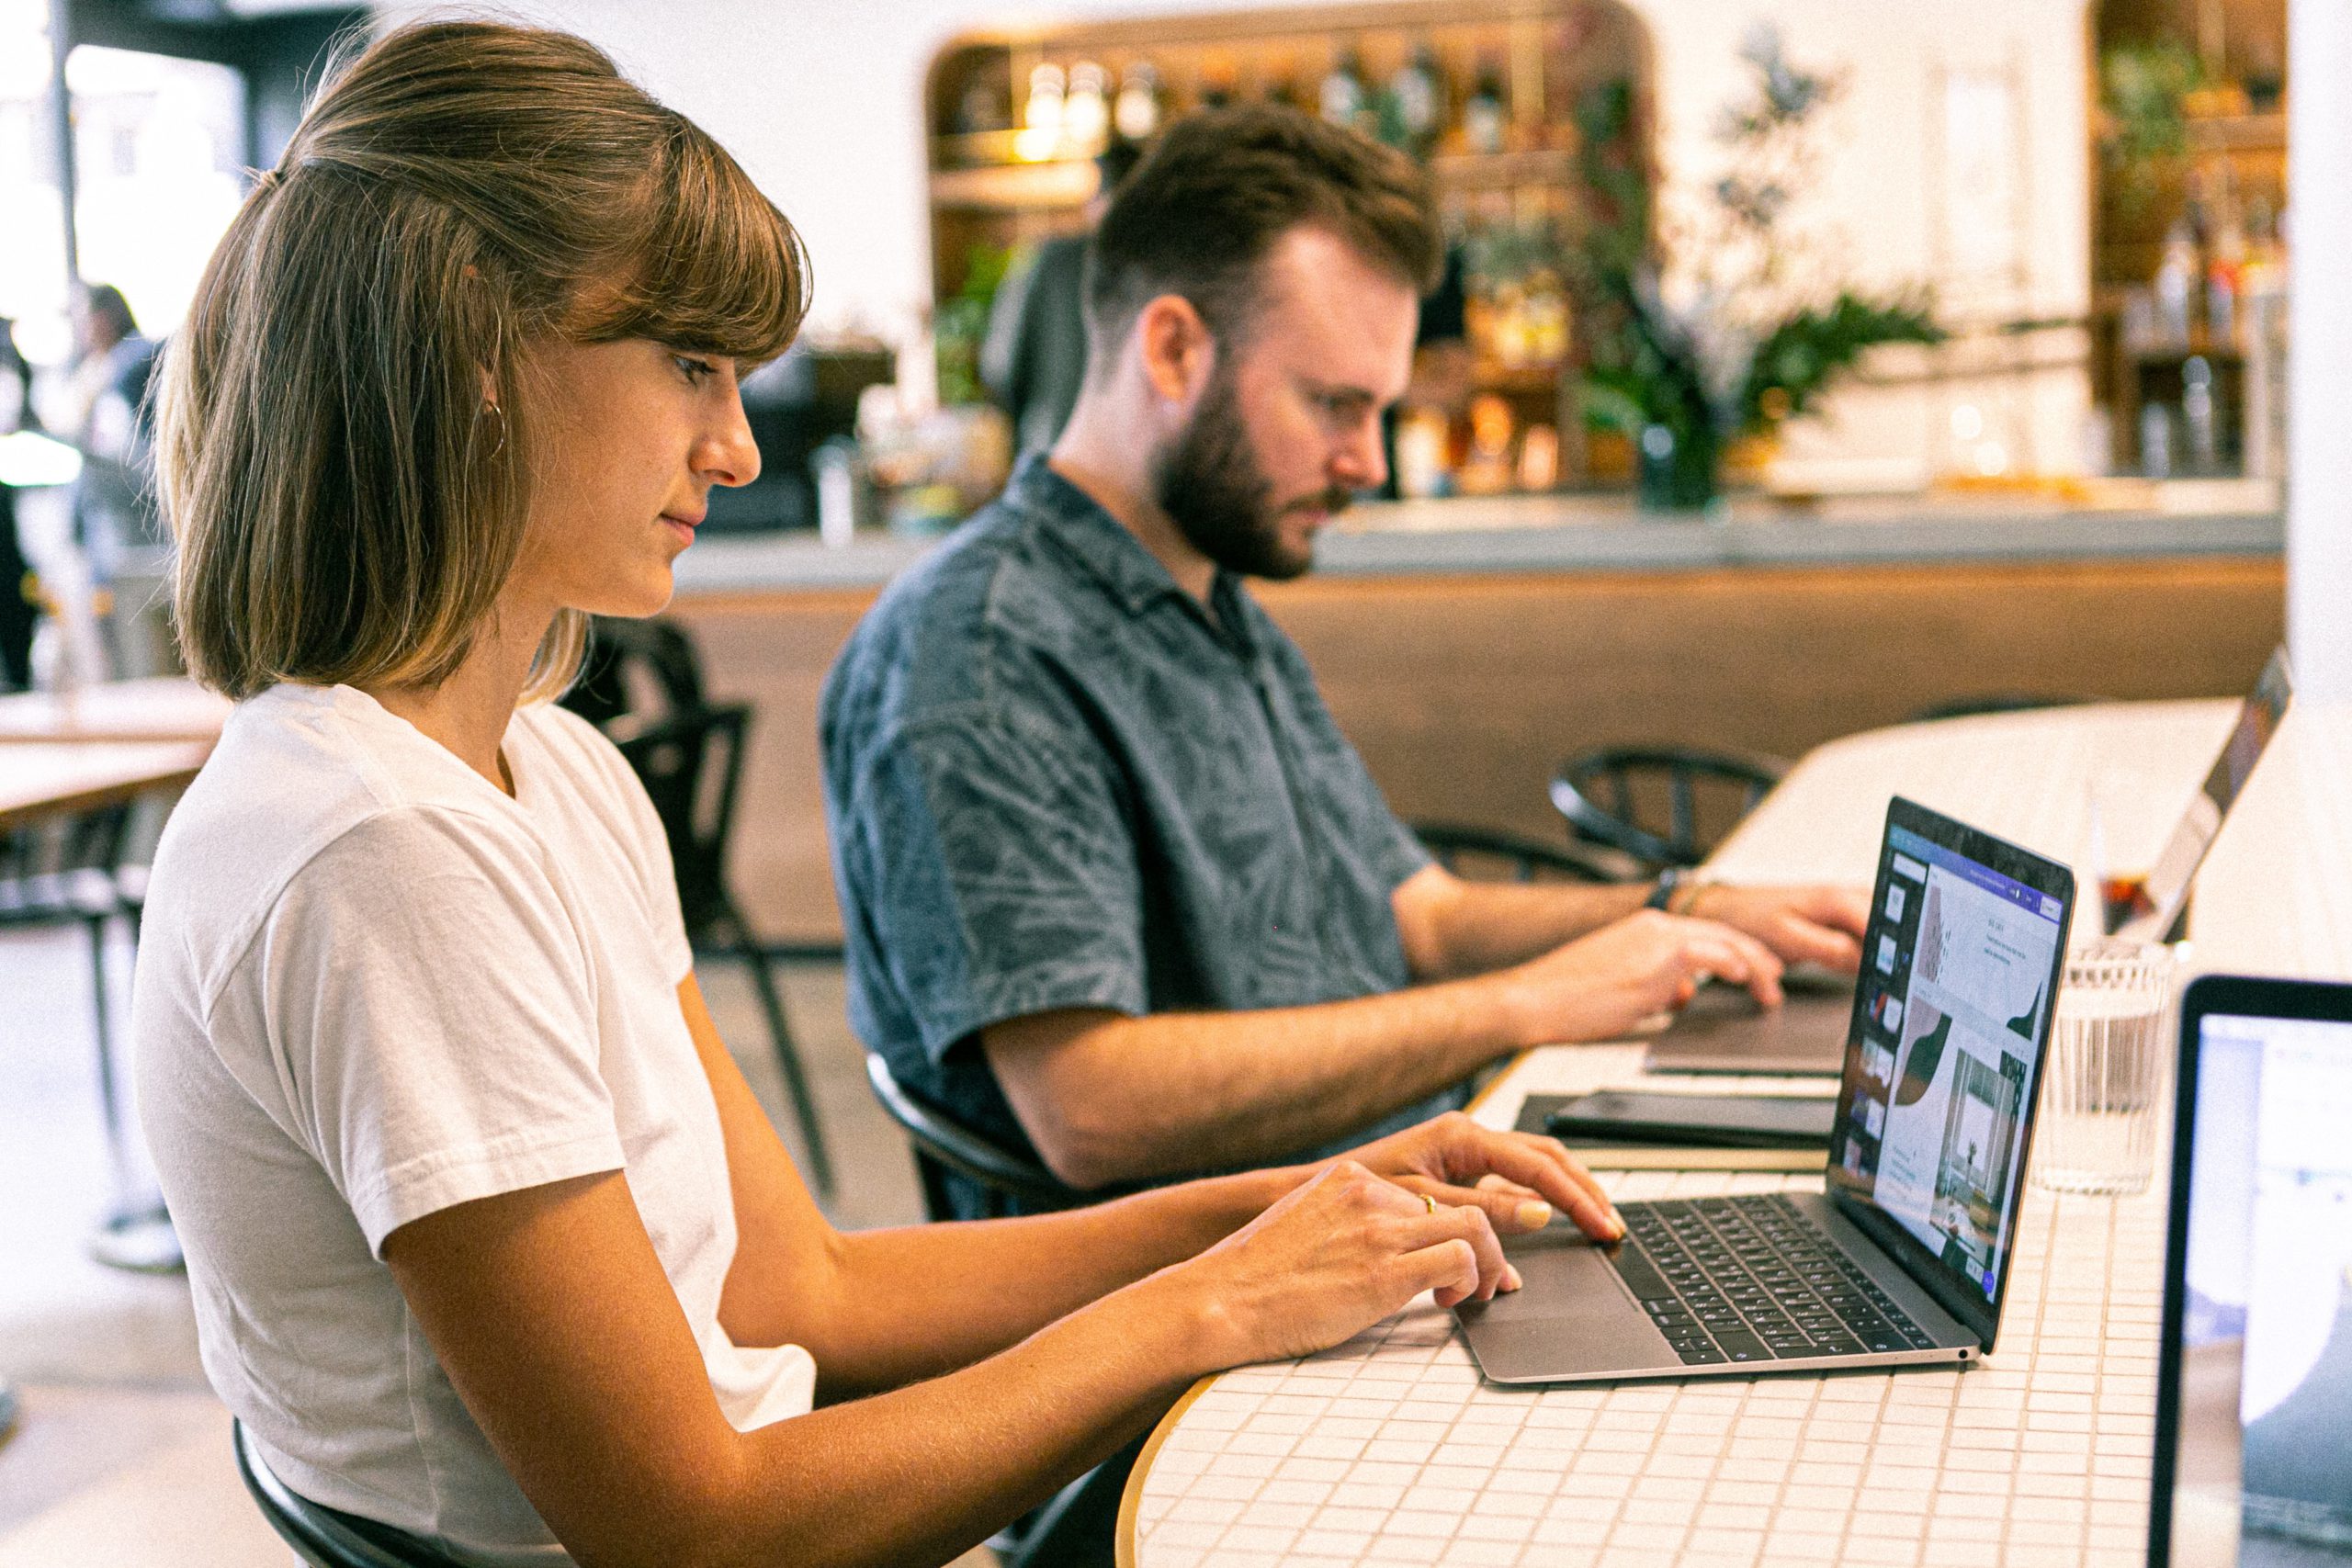 Man and woman on laptops at an office desk looking at their screens